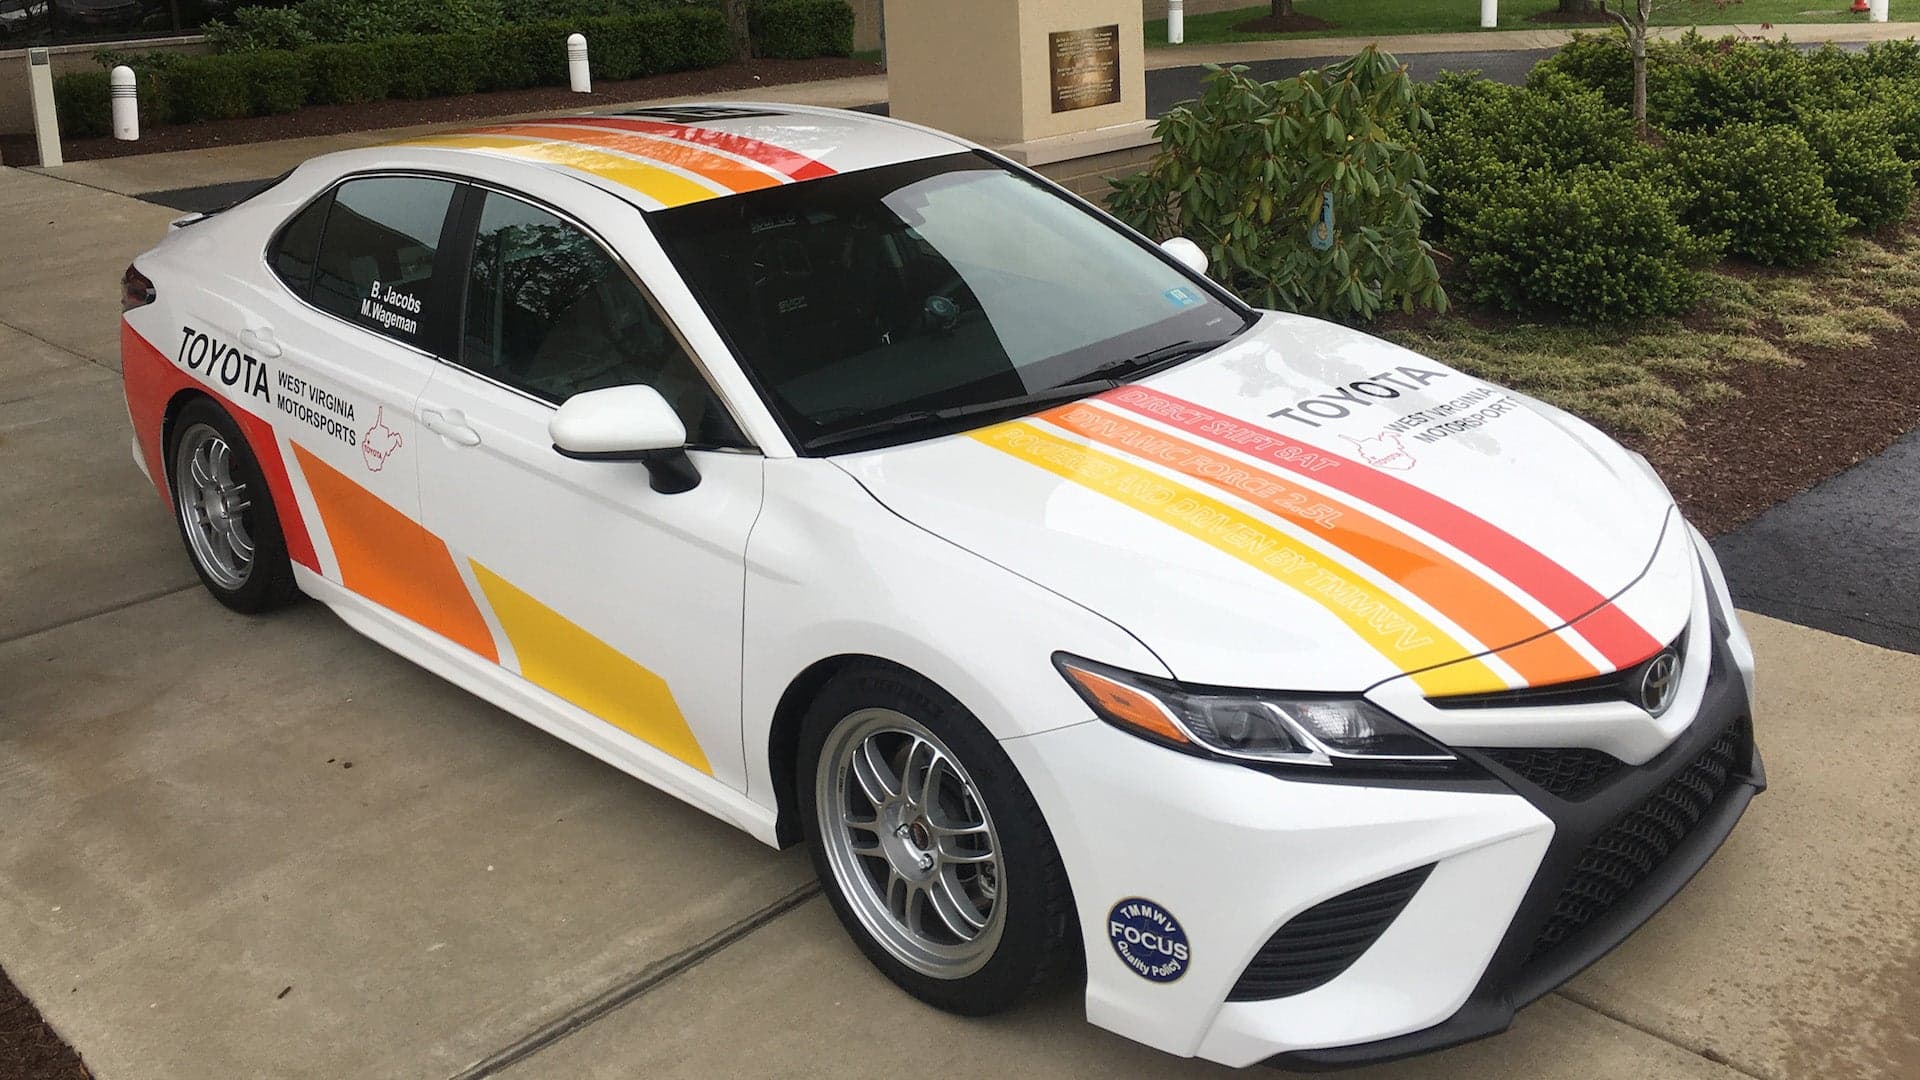 Toyota Camry Sedans and a Prius Expected to Surprise Racers on the Track